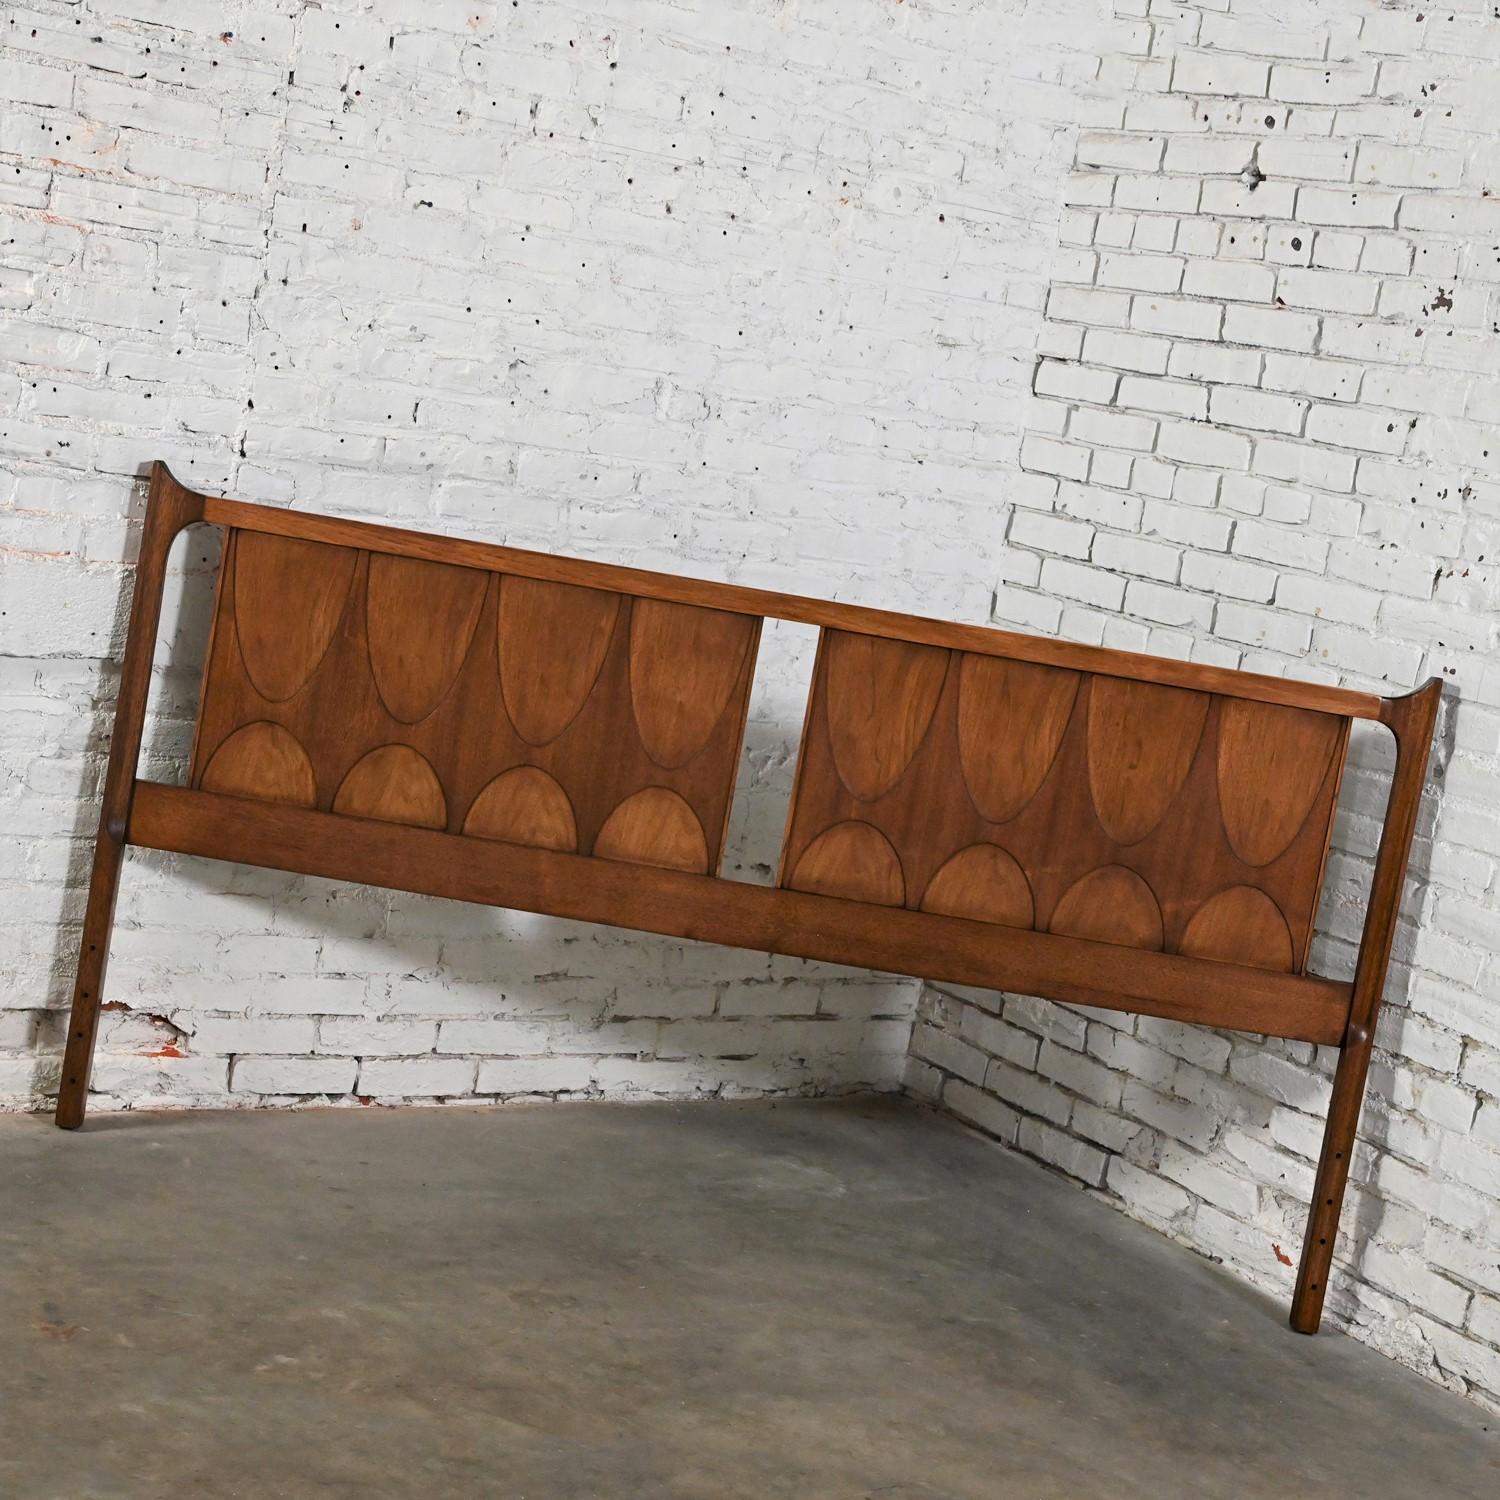 Lovely Mid-Century Modern Brutalist Brasilia king sized headboard #6130-59 Broyhill Premier Series comprised of a sculpted walnut panel.  Beautiful condition, keeping in mind that this is vintage and not new so will have signs of use and wear. This